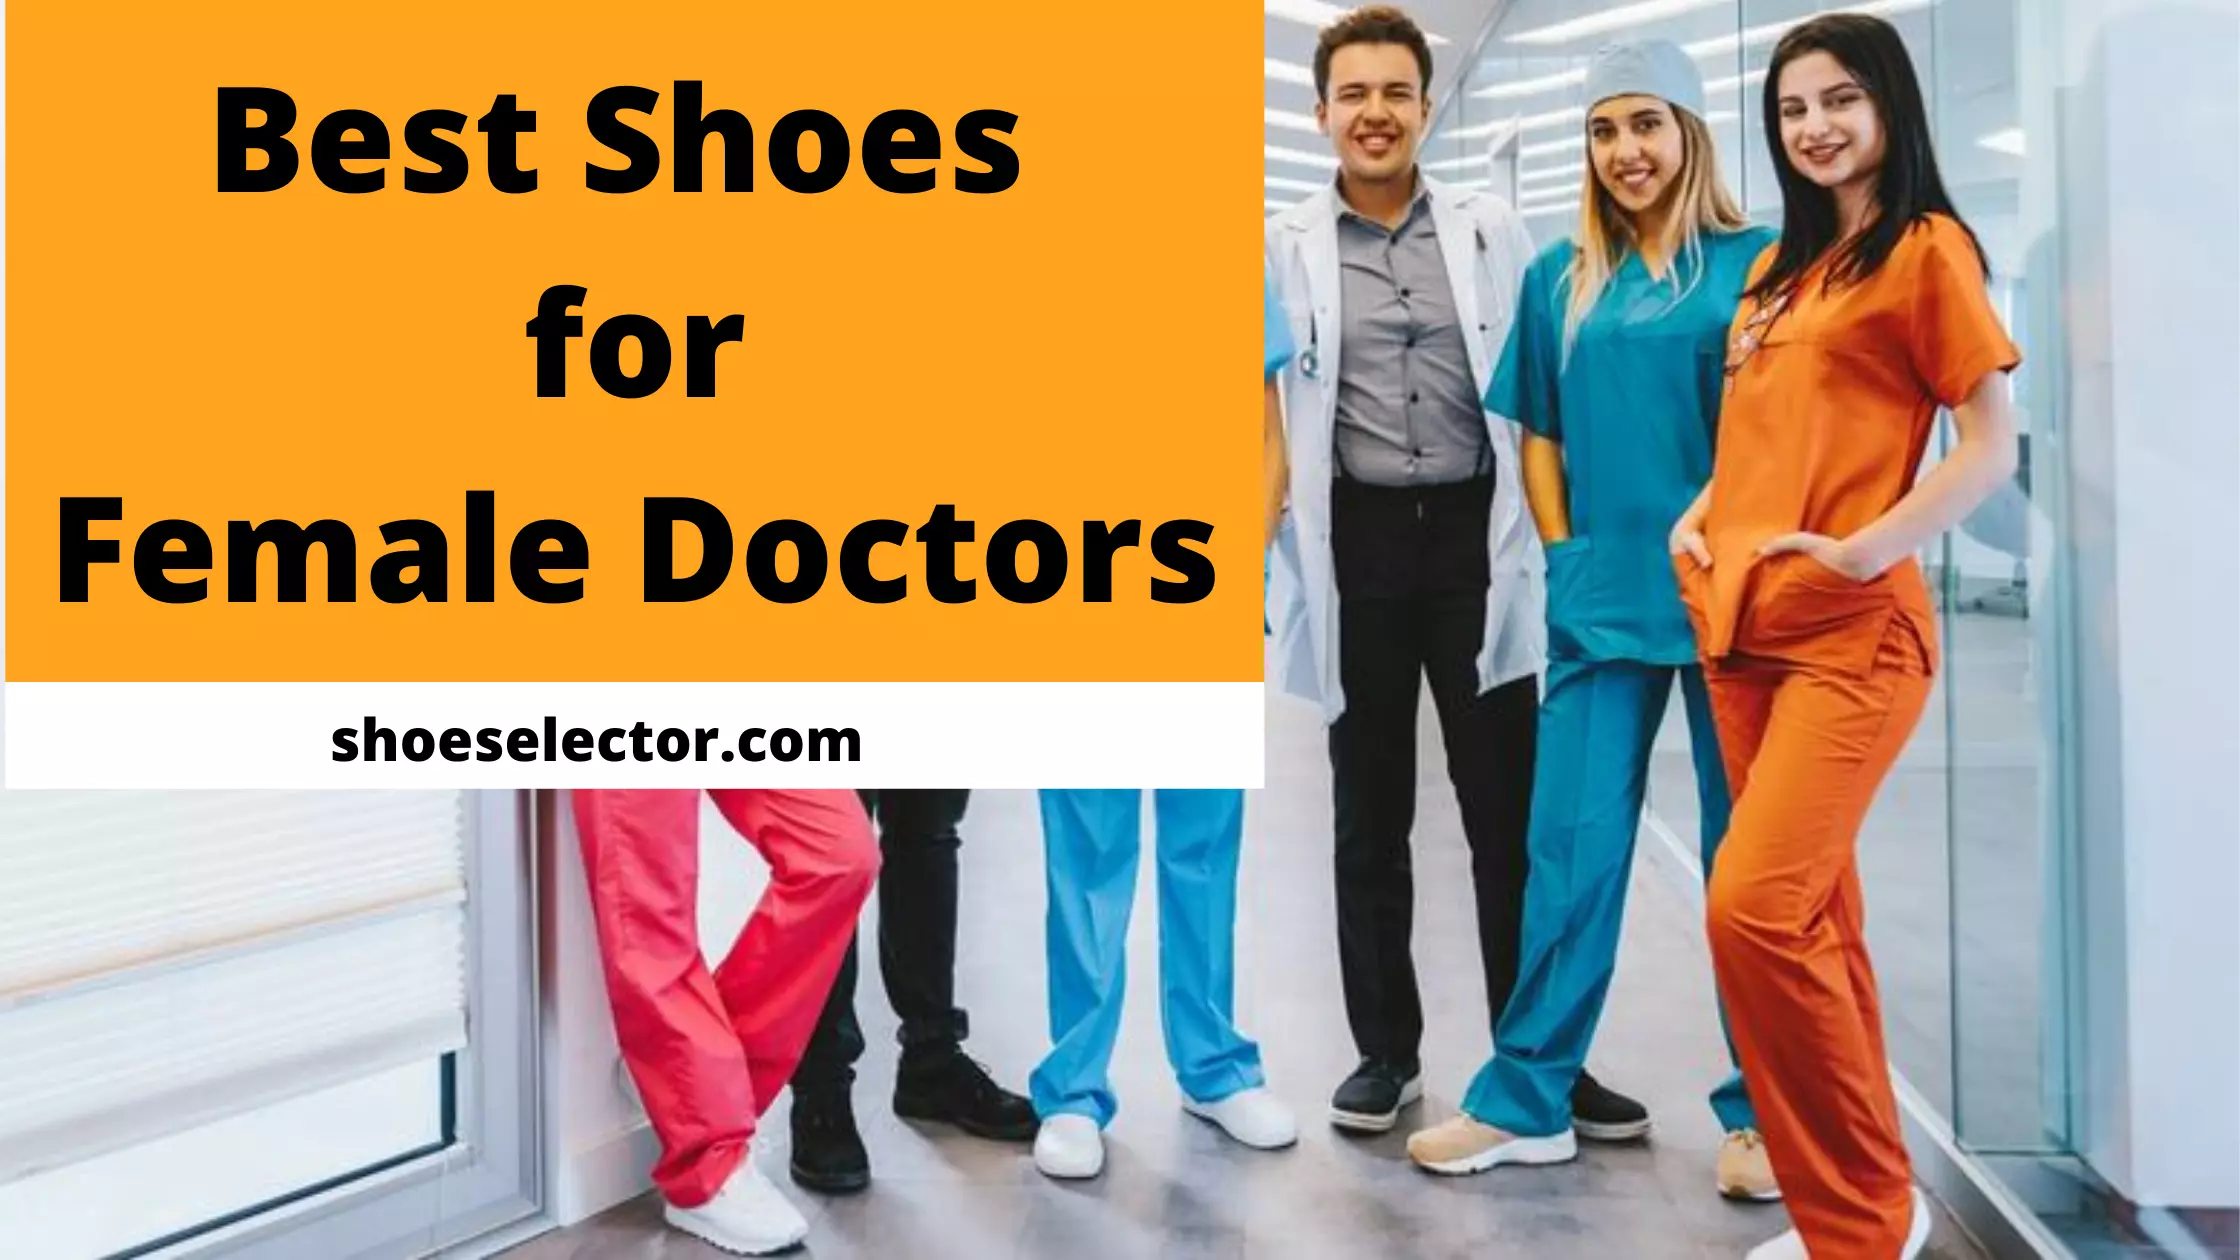 Best Shoes for Female Doctors - Complete Shopping Tips